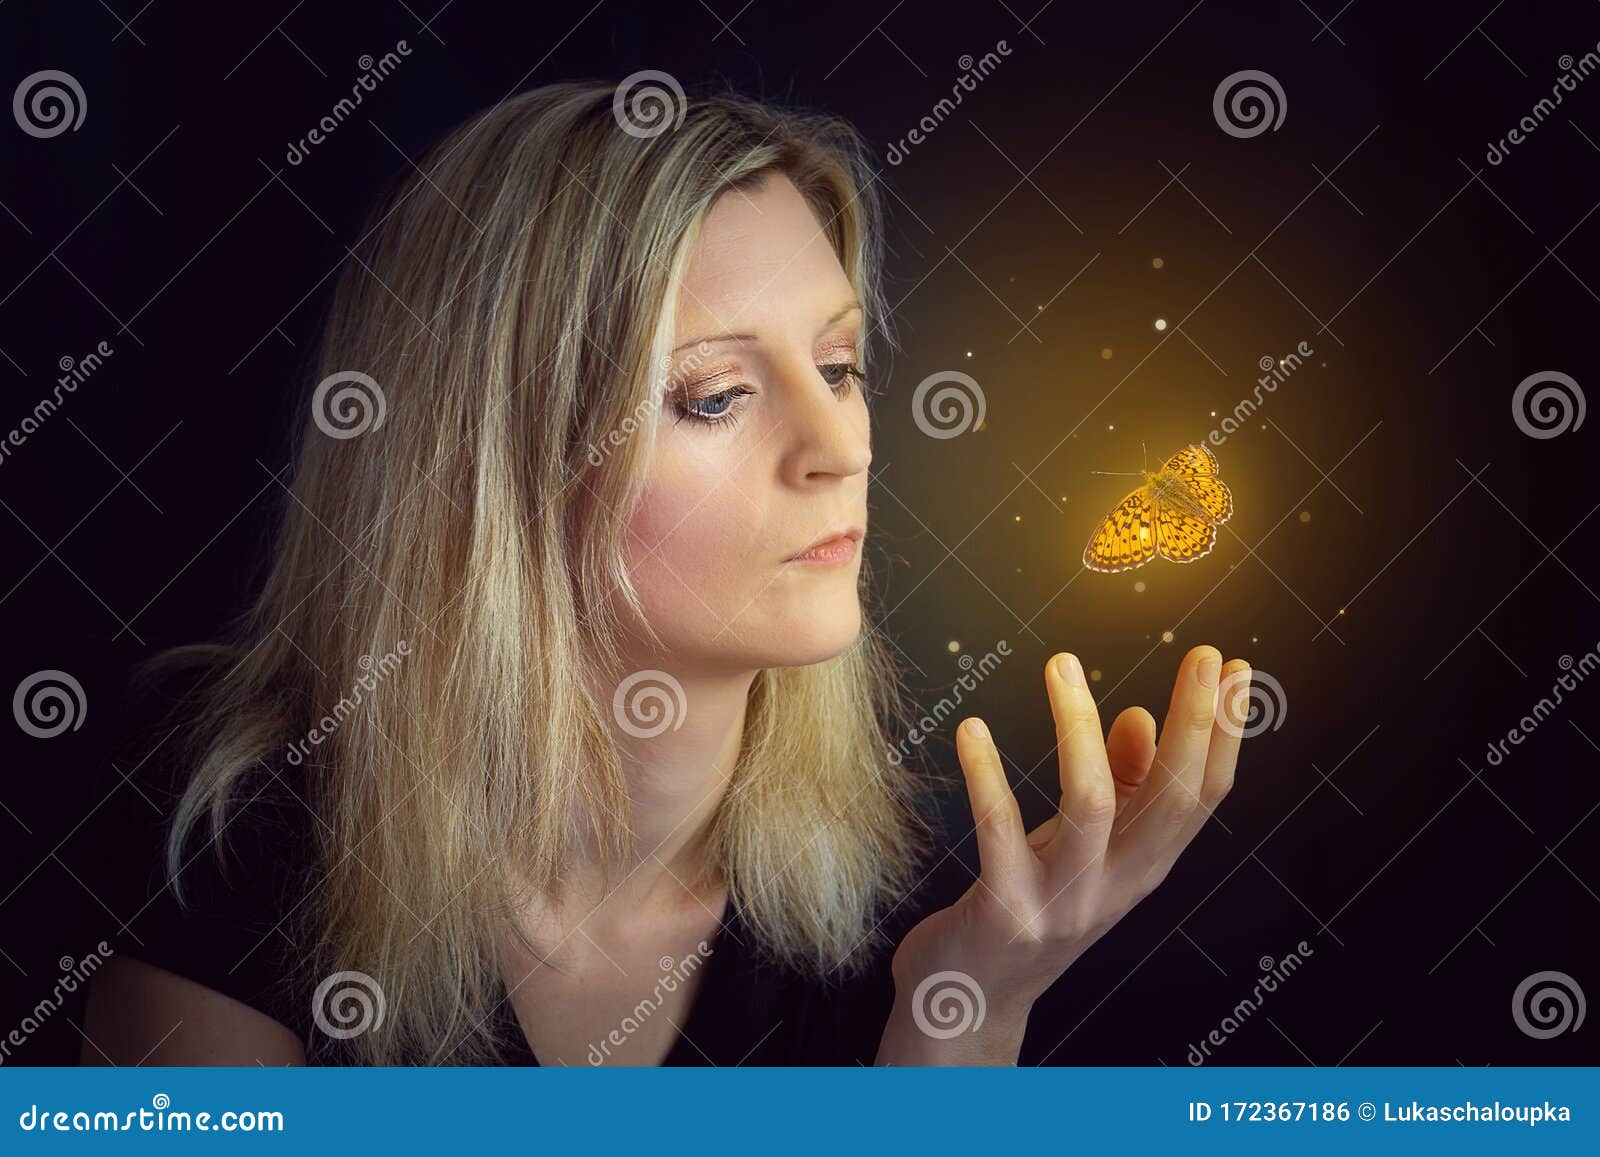 beauty young blond hair woman hold hand under glowing orange butterfly. photomanipulation glowing lepidopteran on black background